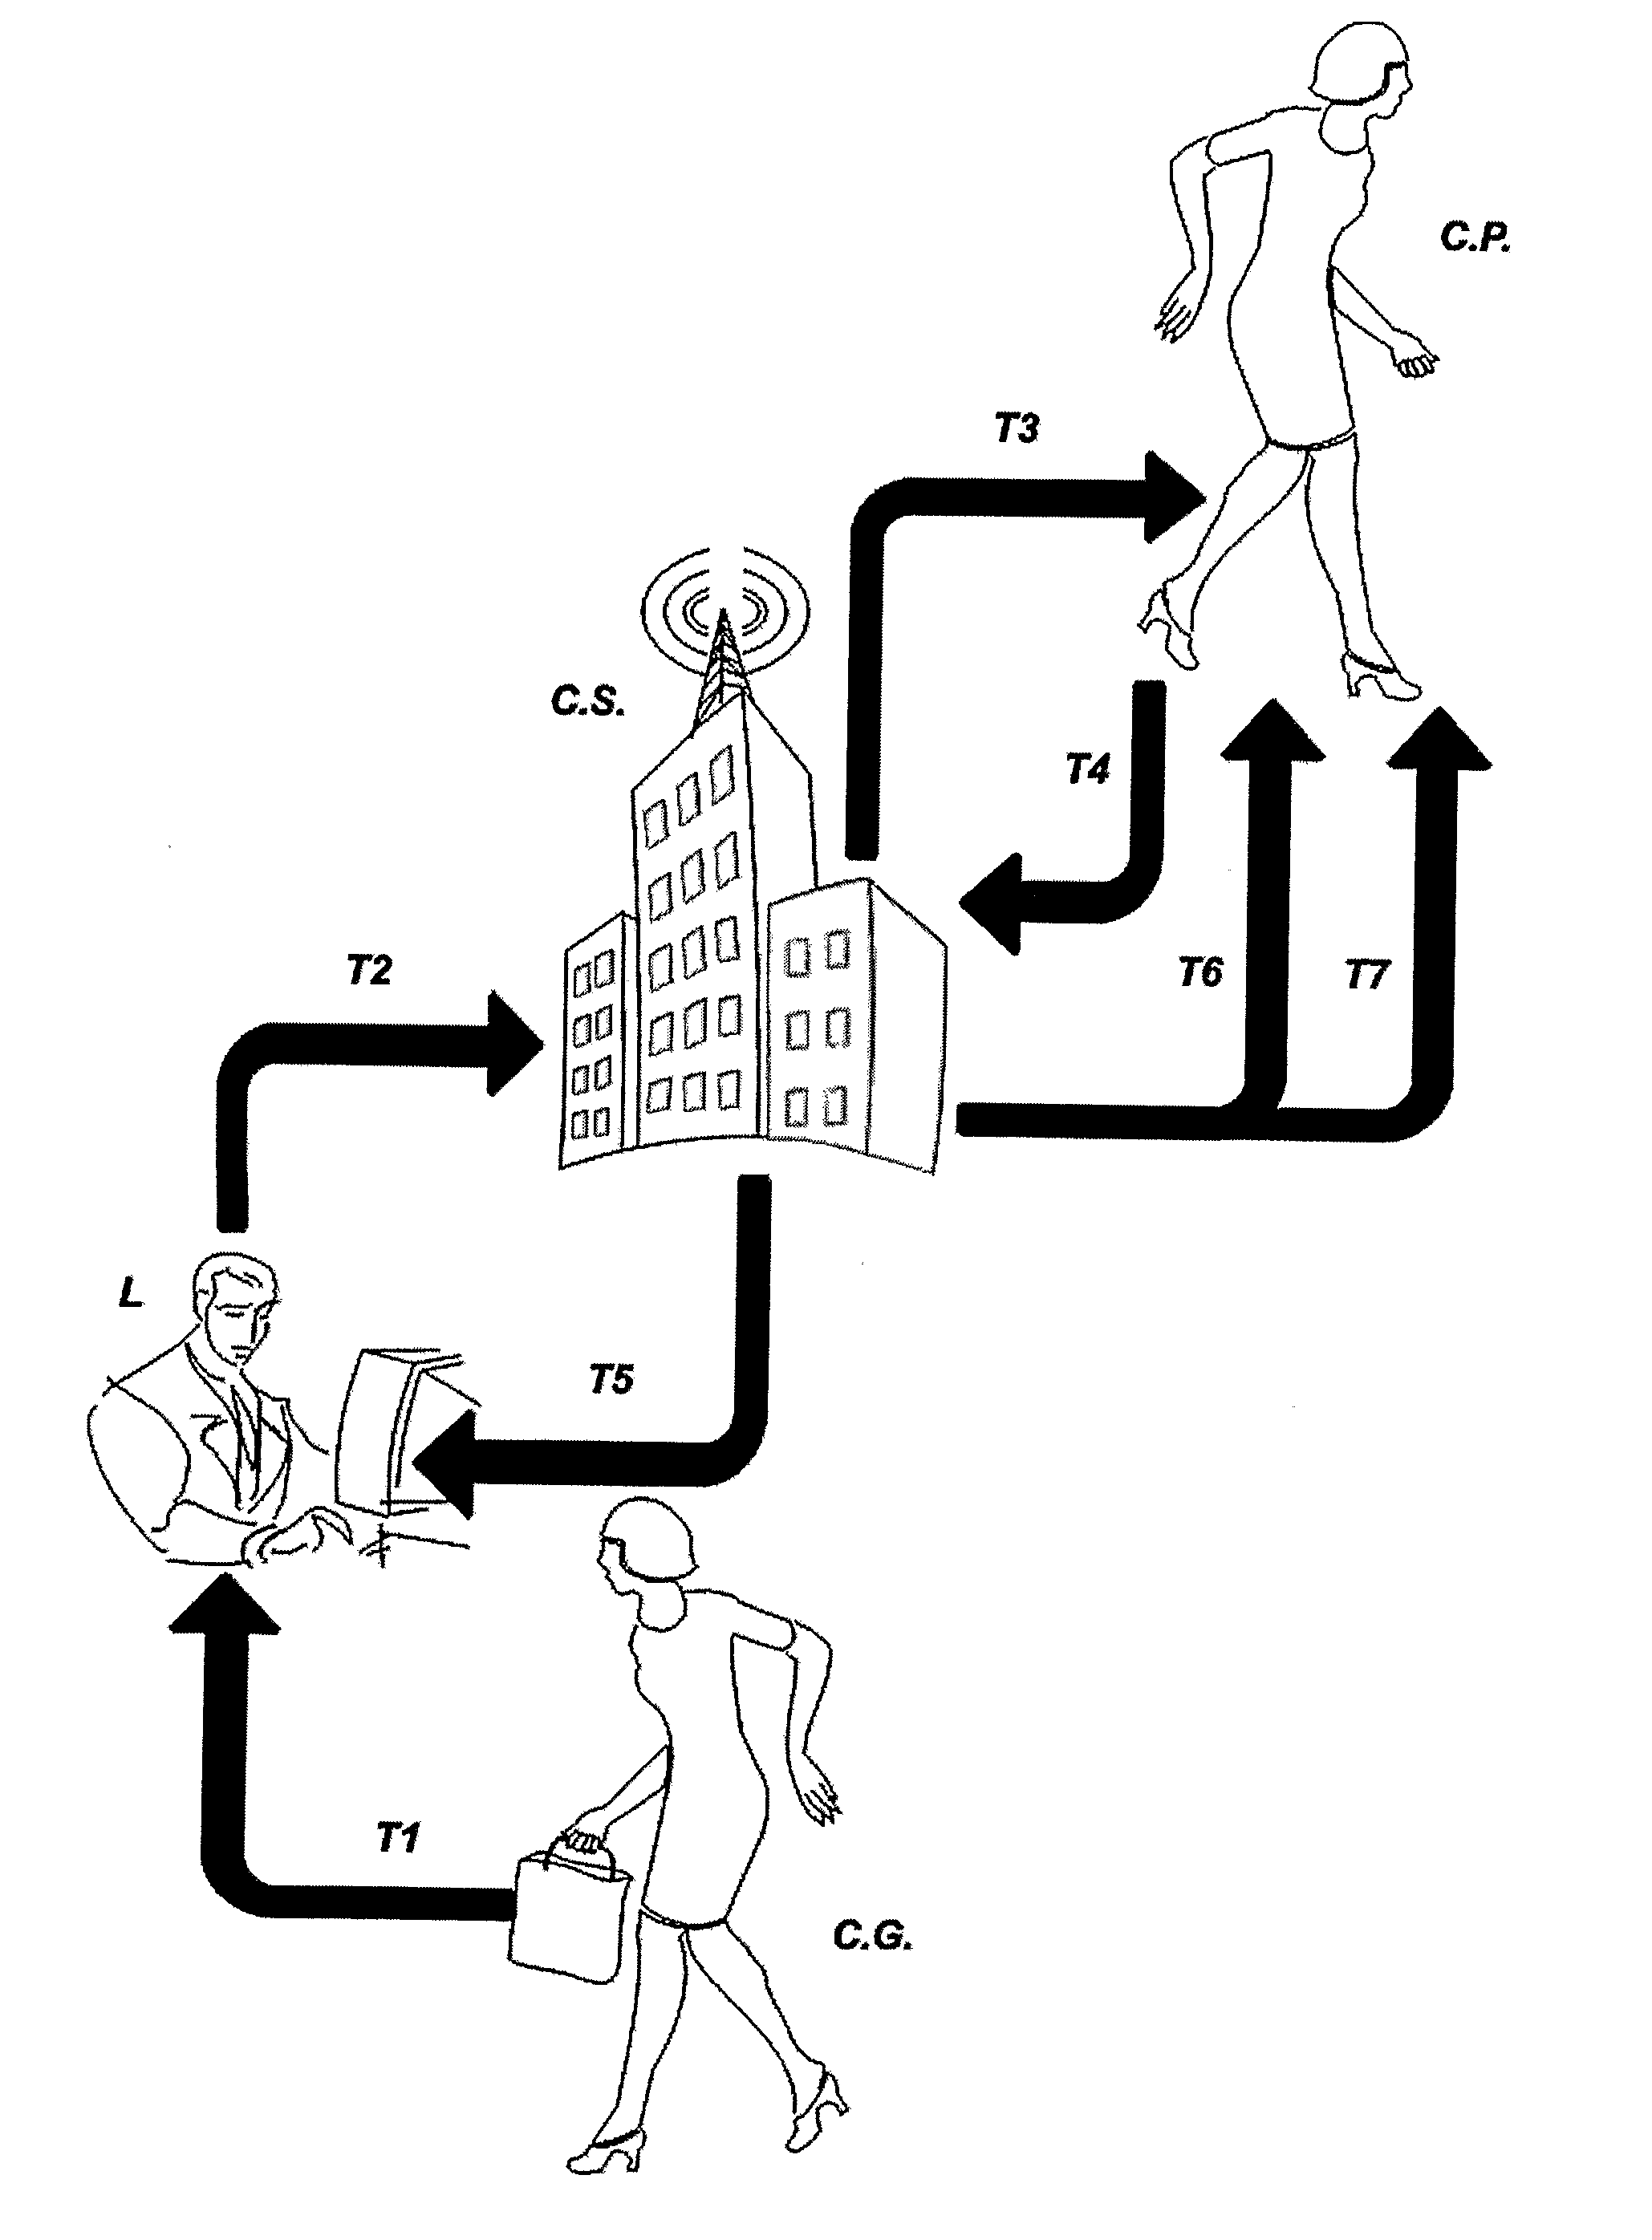 System for managing and facilitating financial transactions locally or remotely made